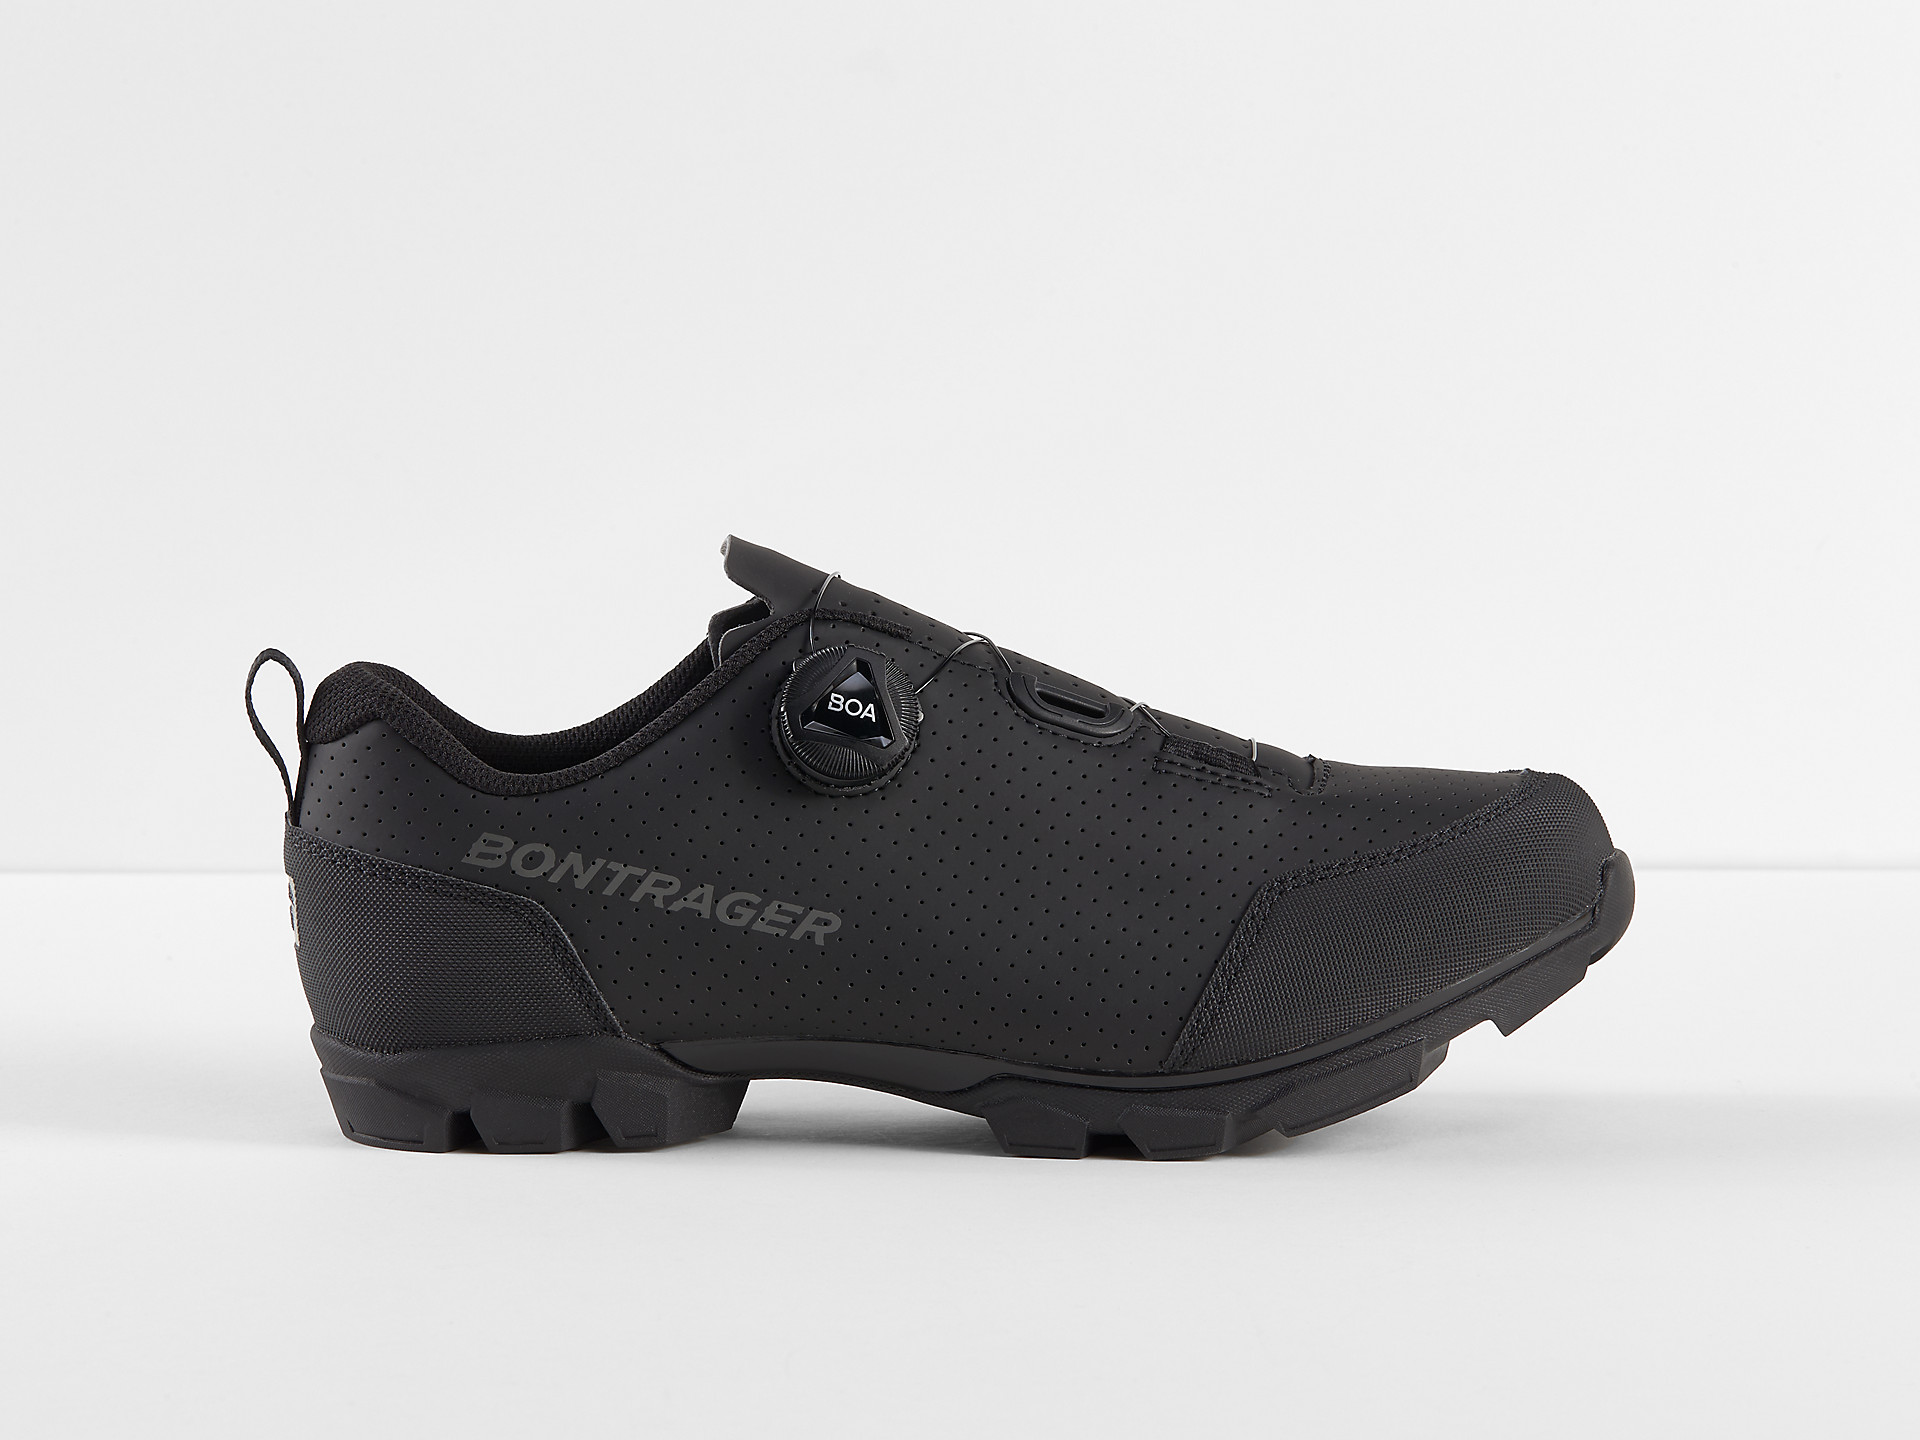 <a href="https://cycles-clement.be/product/bont-chaussures-evoke-48-black/">BONT CHAUSSURES EVOKE 48 BLACK</a>